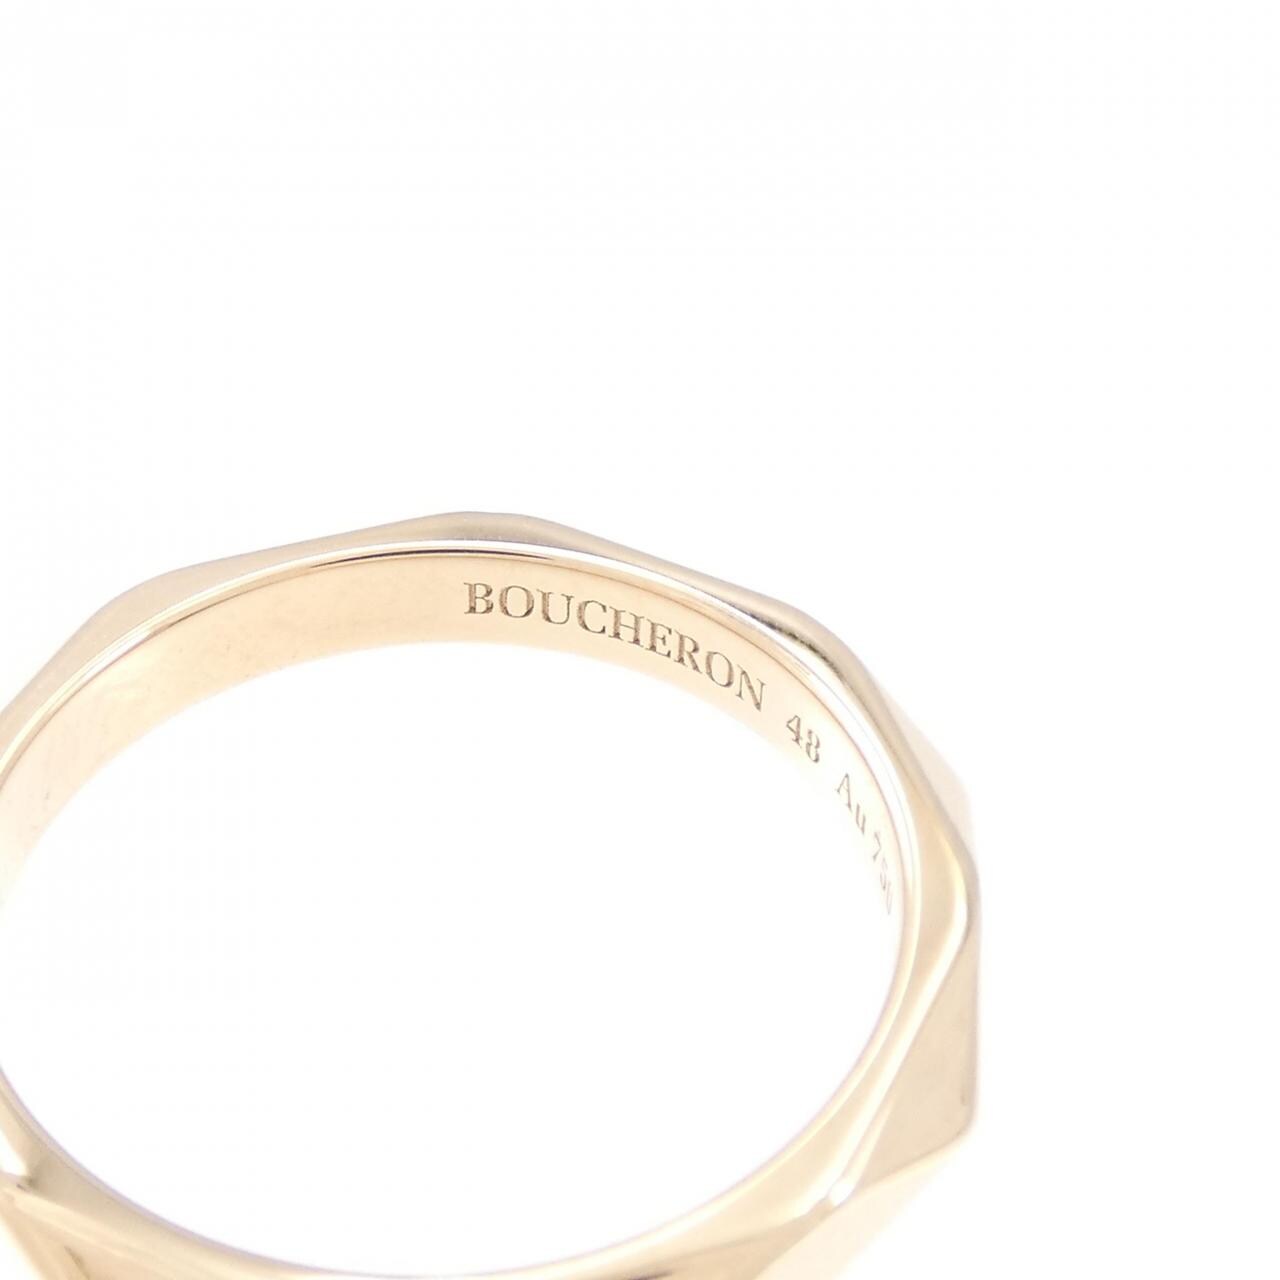 Boucheron faceted ring